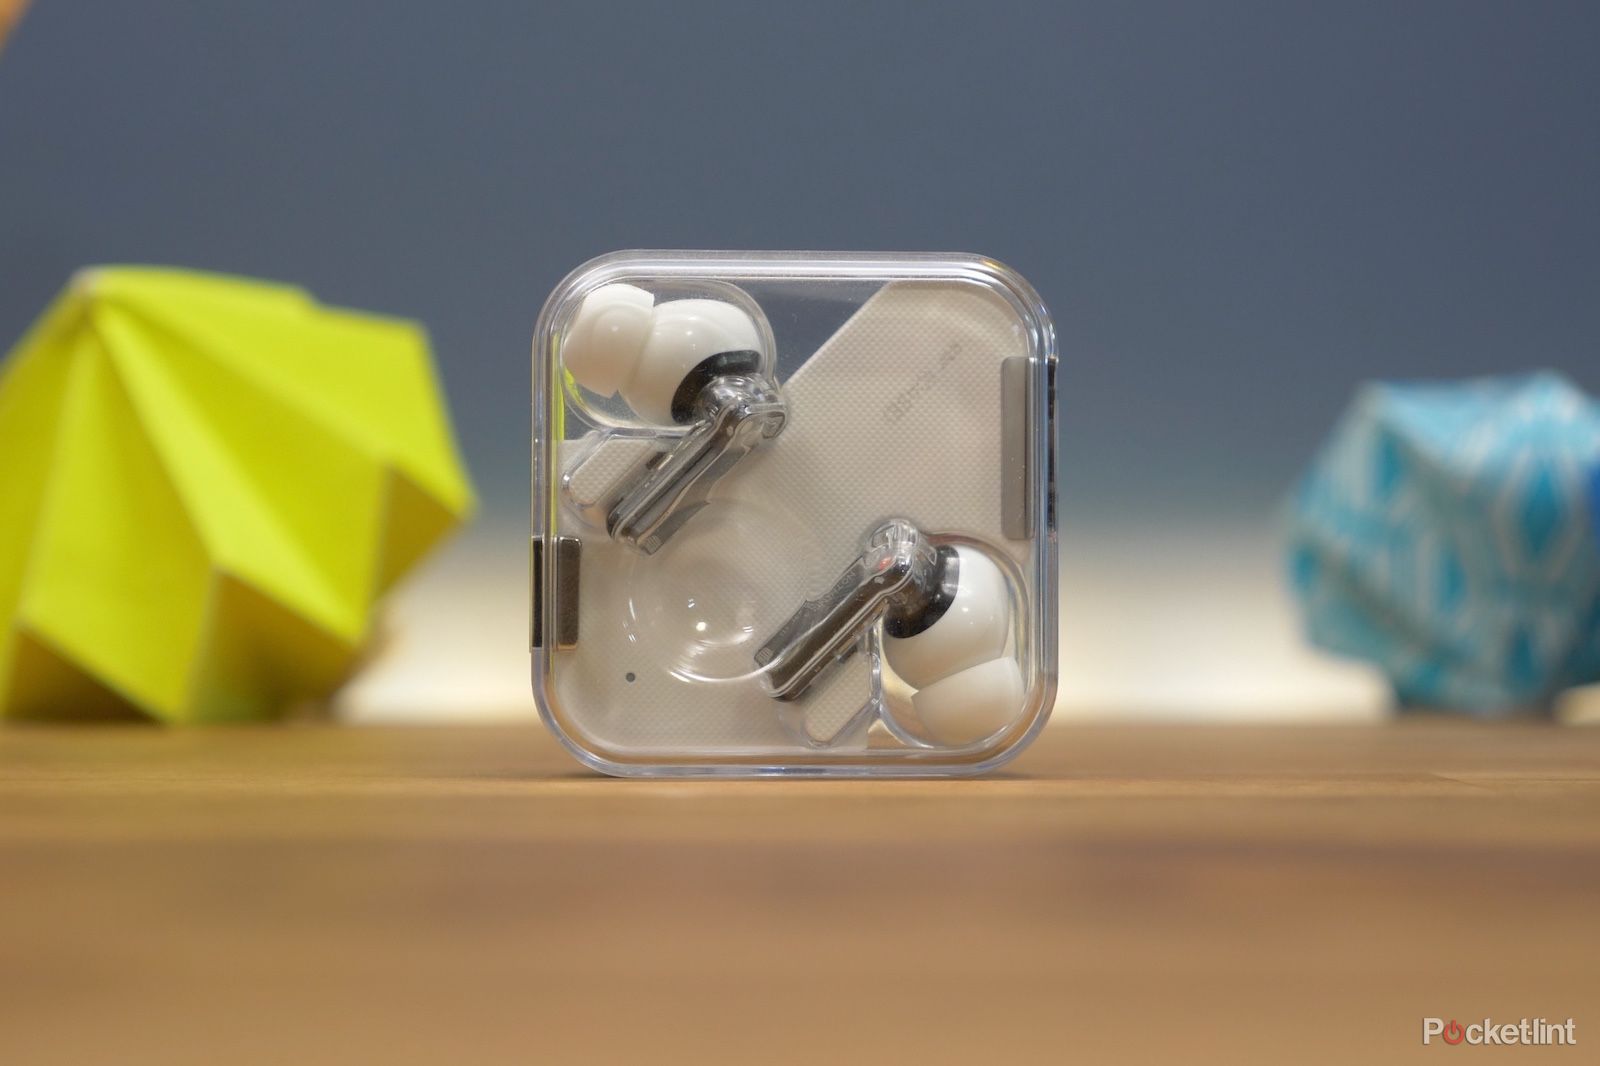 Nothing Ear (2) leak suggests it's more of the same for the unannounced earbuds